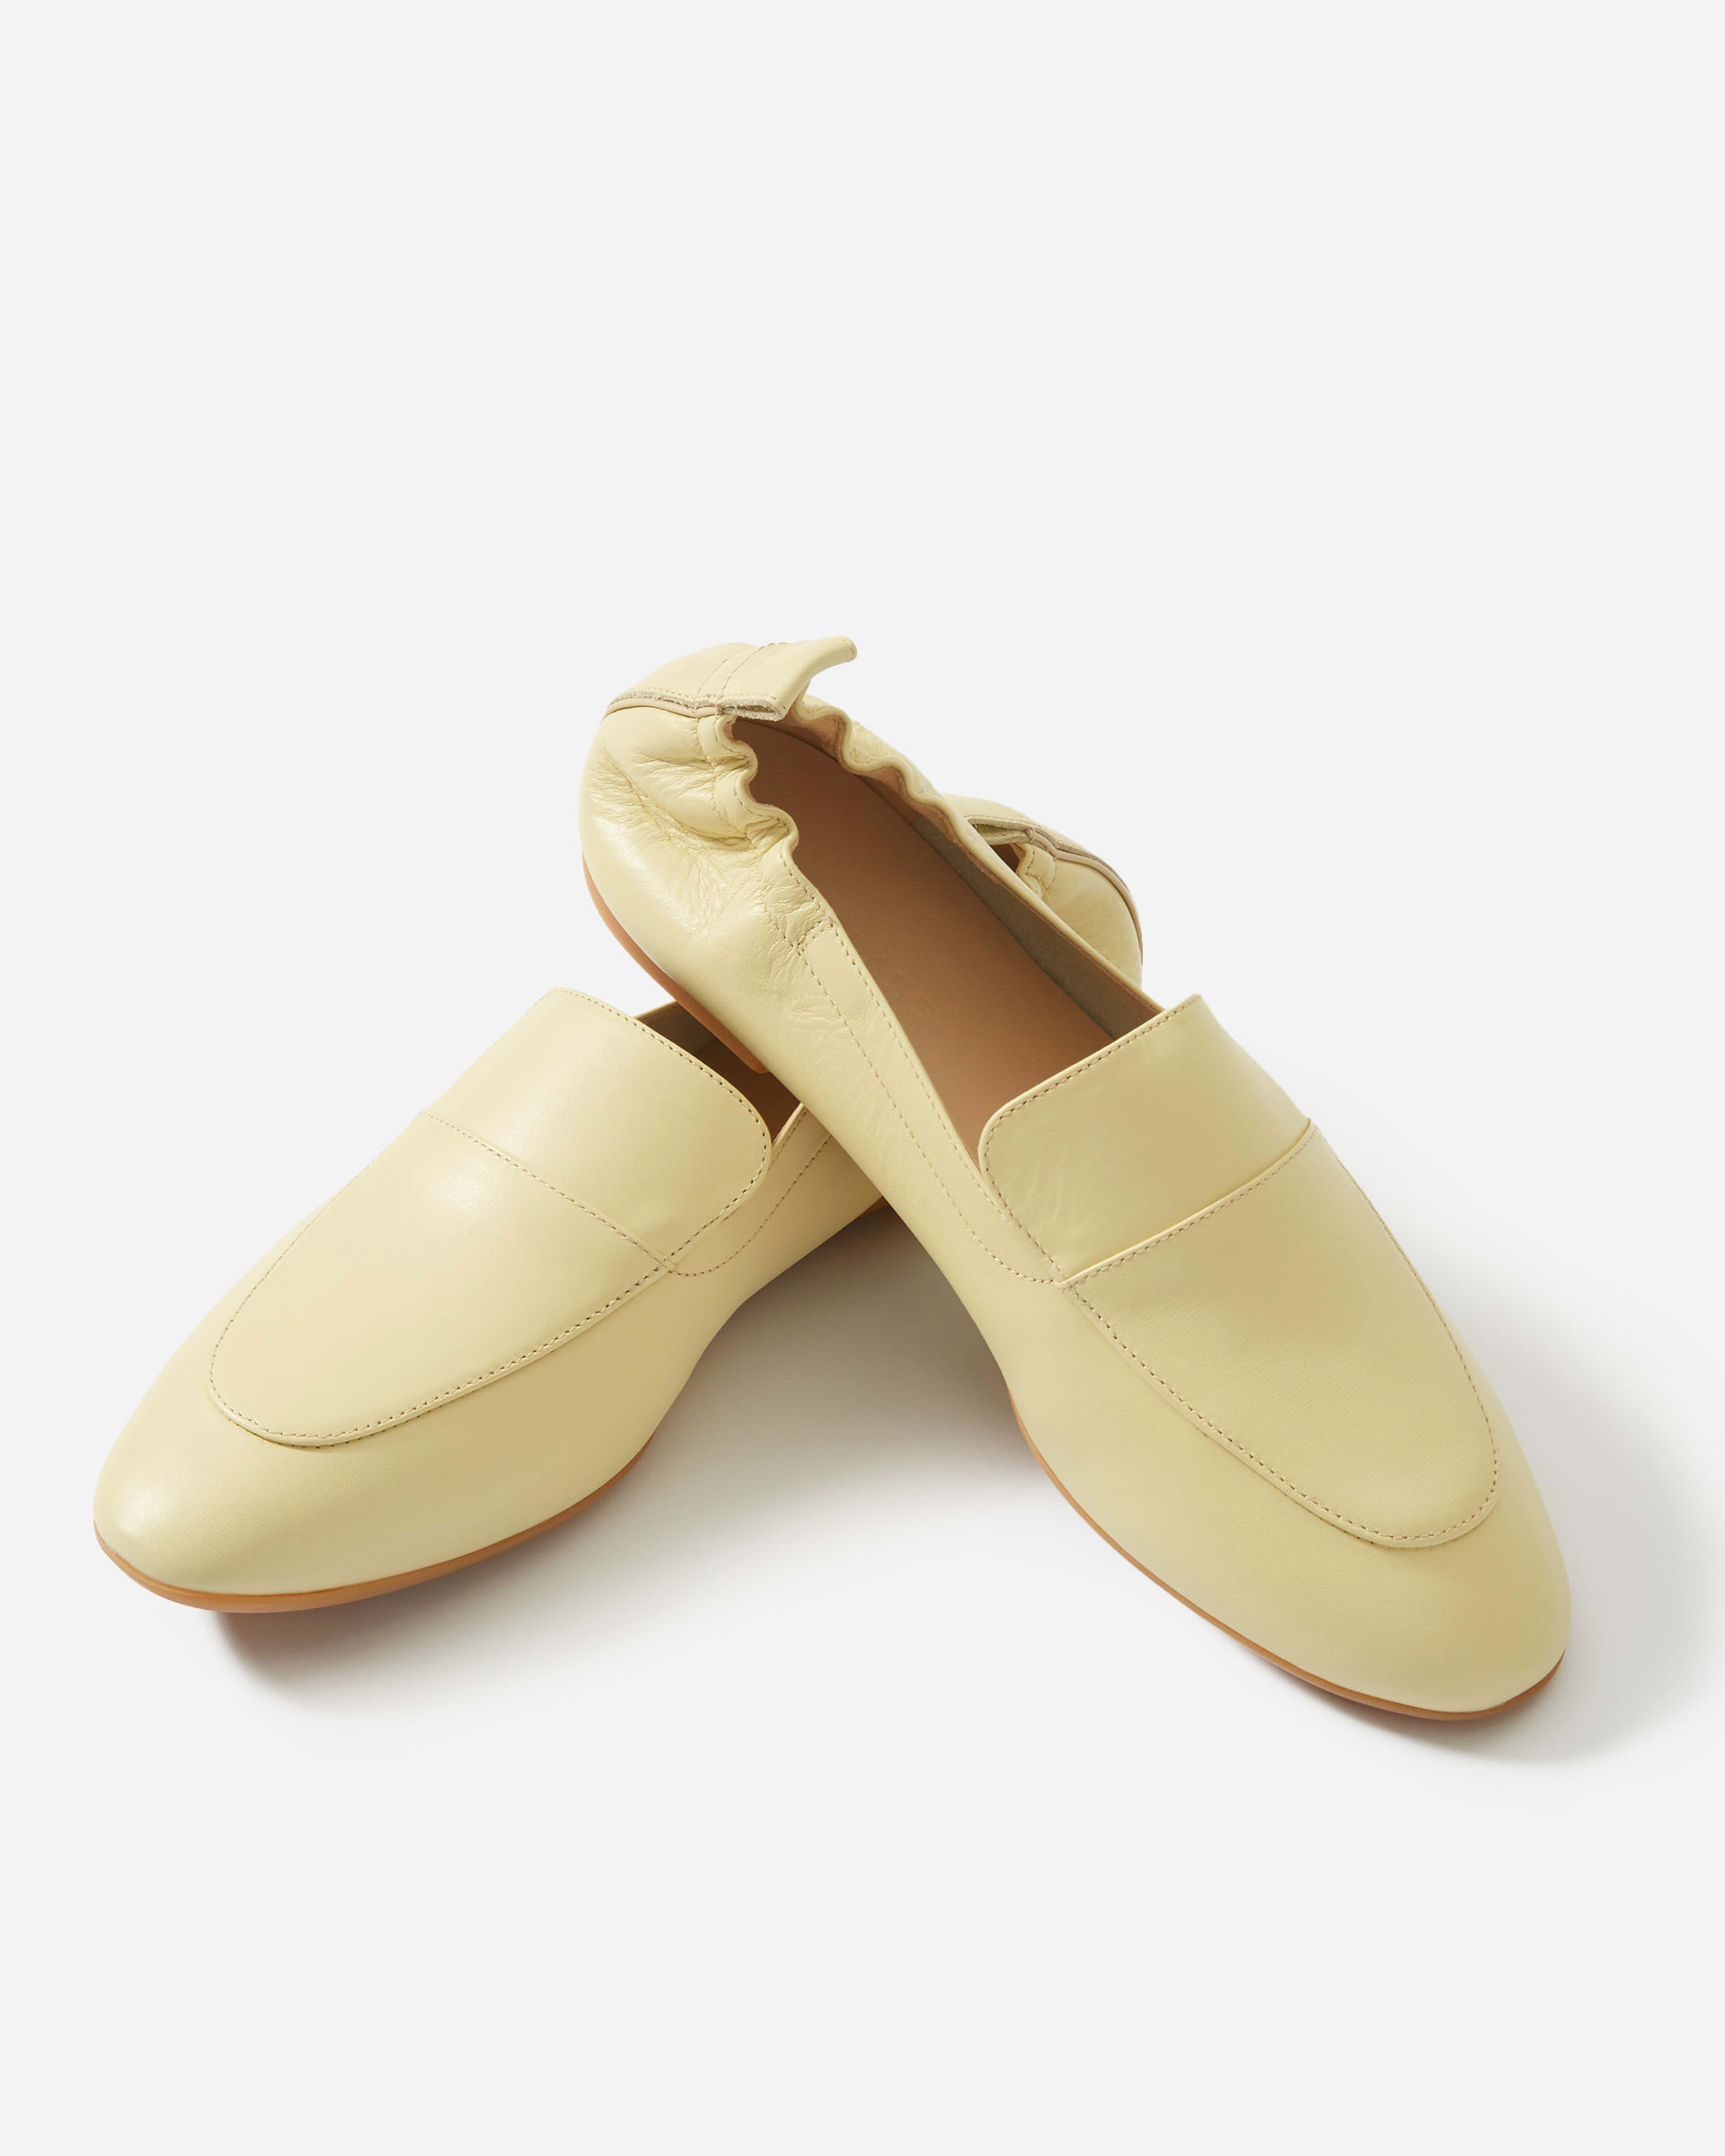 The Day Loafer Pale Yellow – Everlane